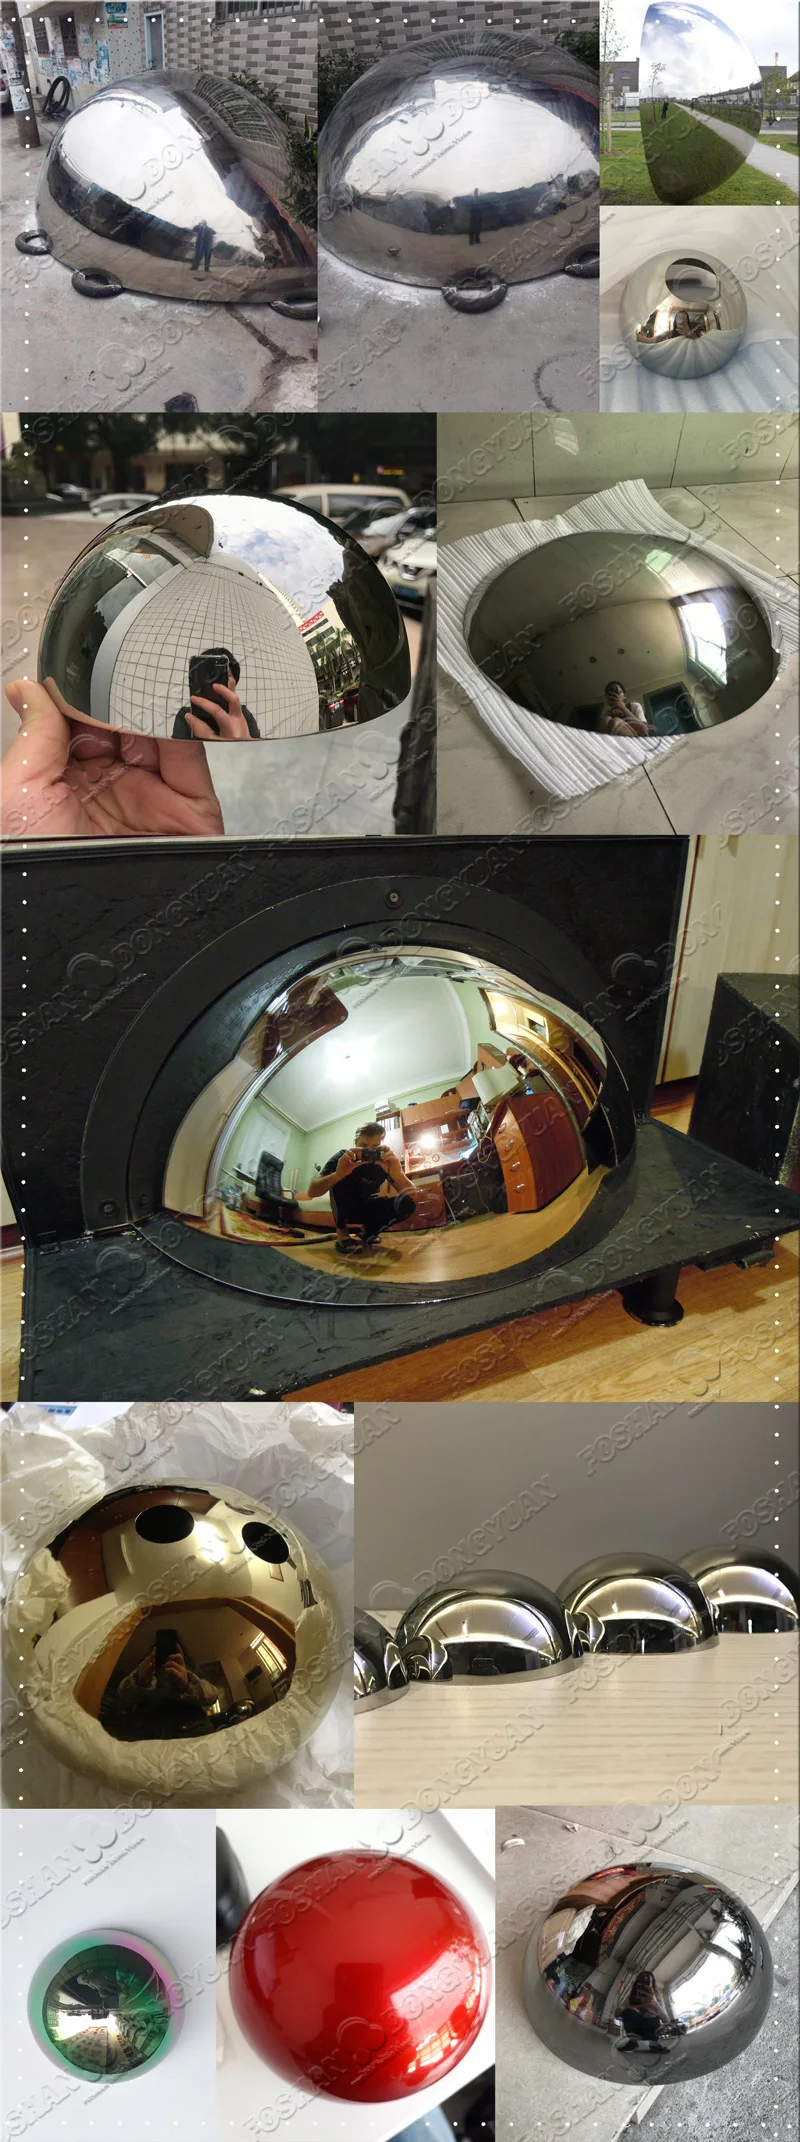 Large Mirror Polished Metal Half Ball of Stainless Steel for Sale